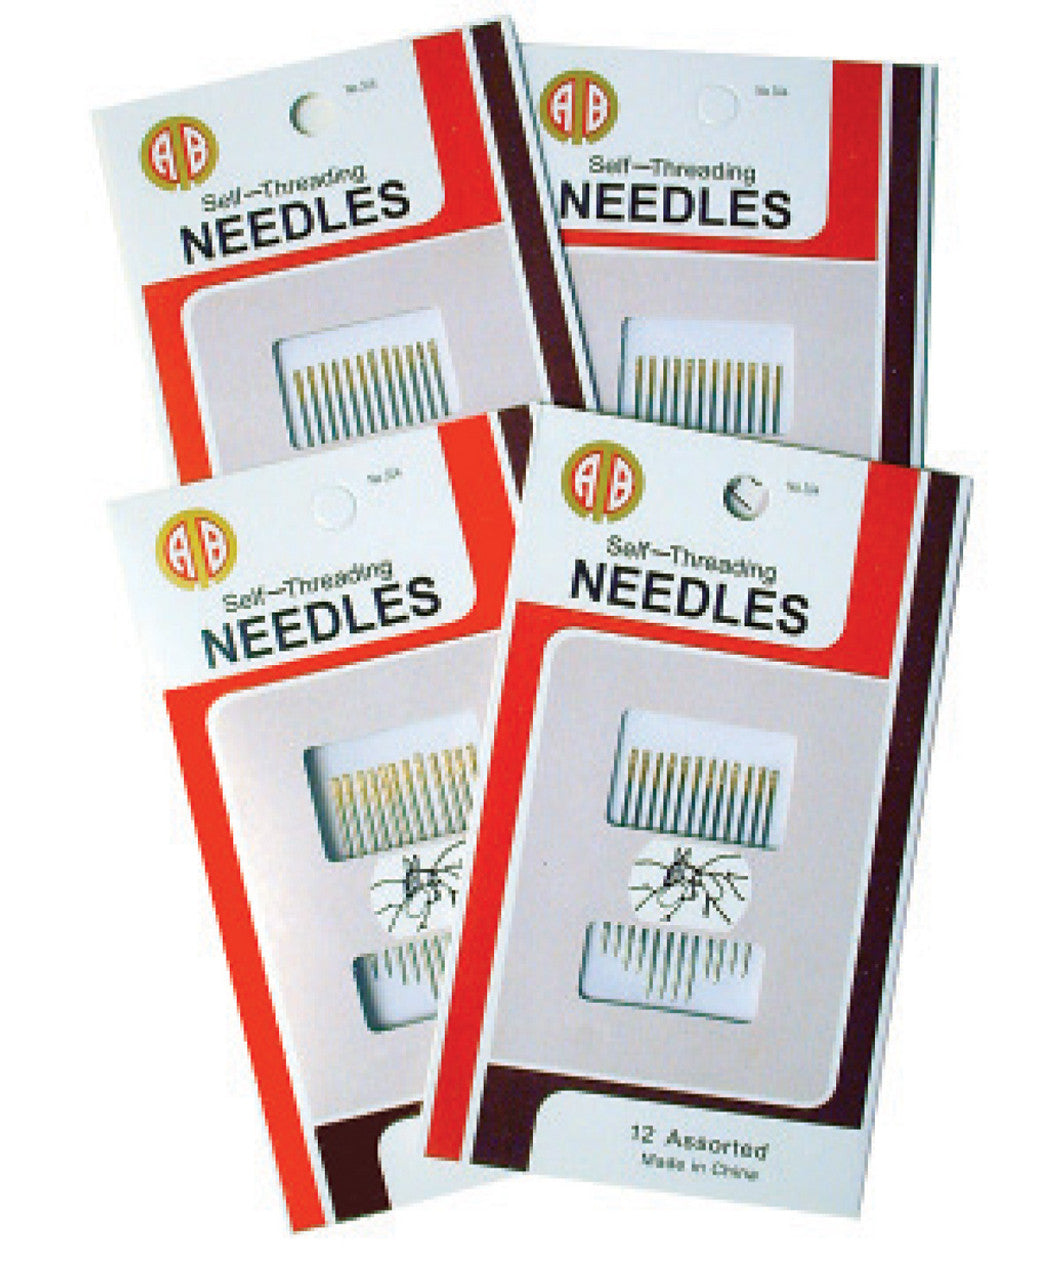 Six packages of #80 Sewing Machine Needles